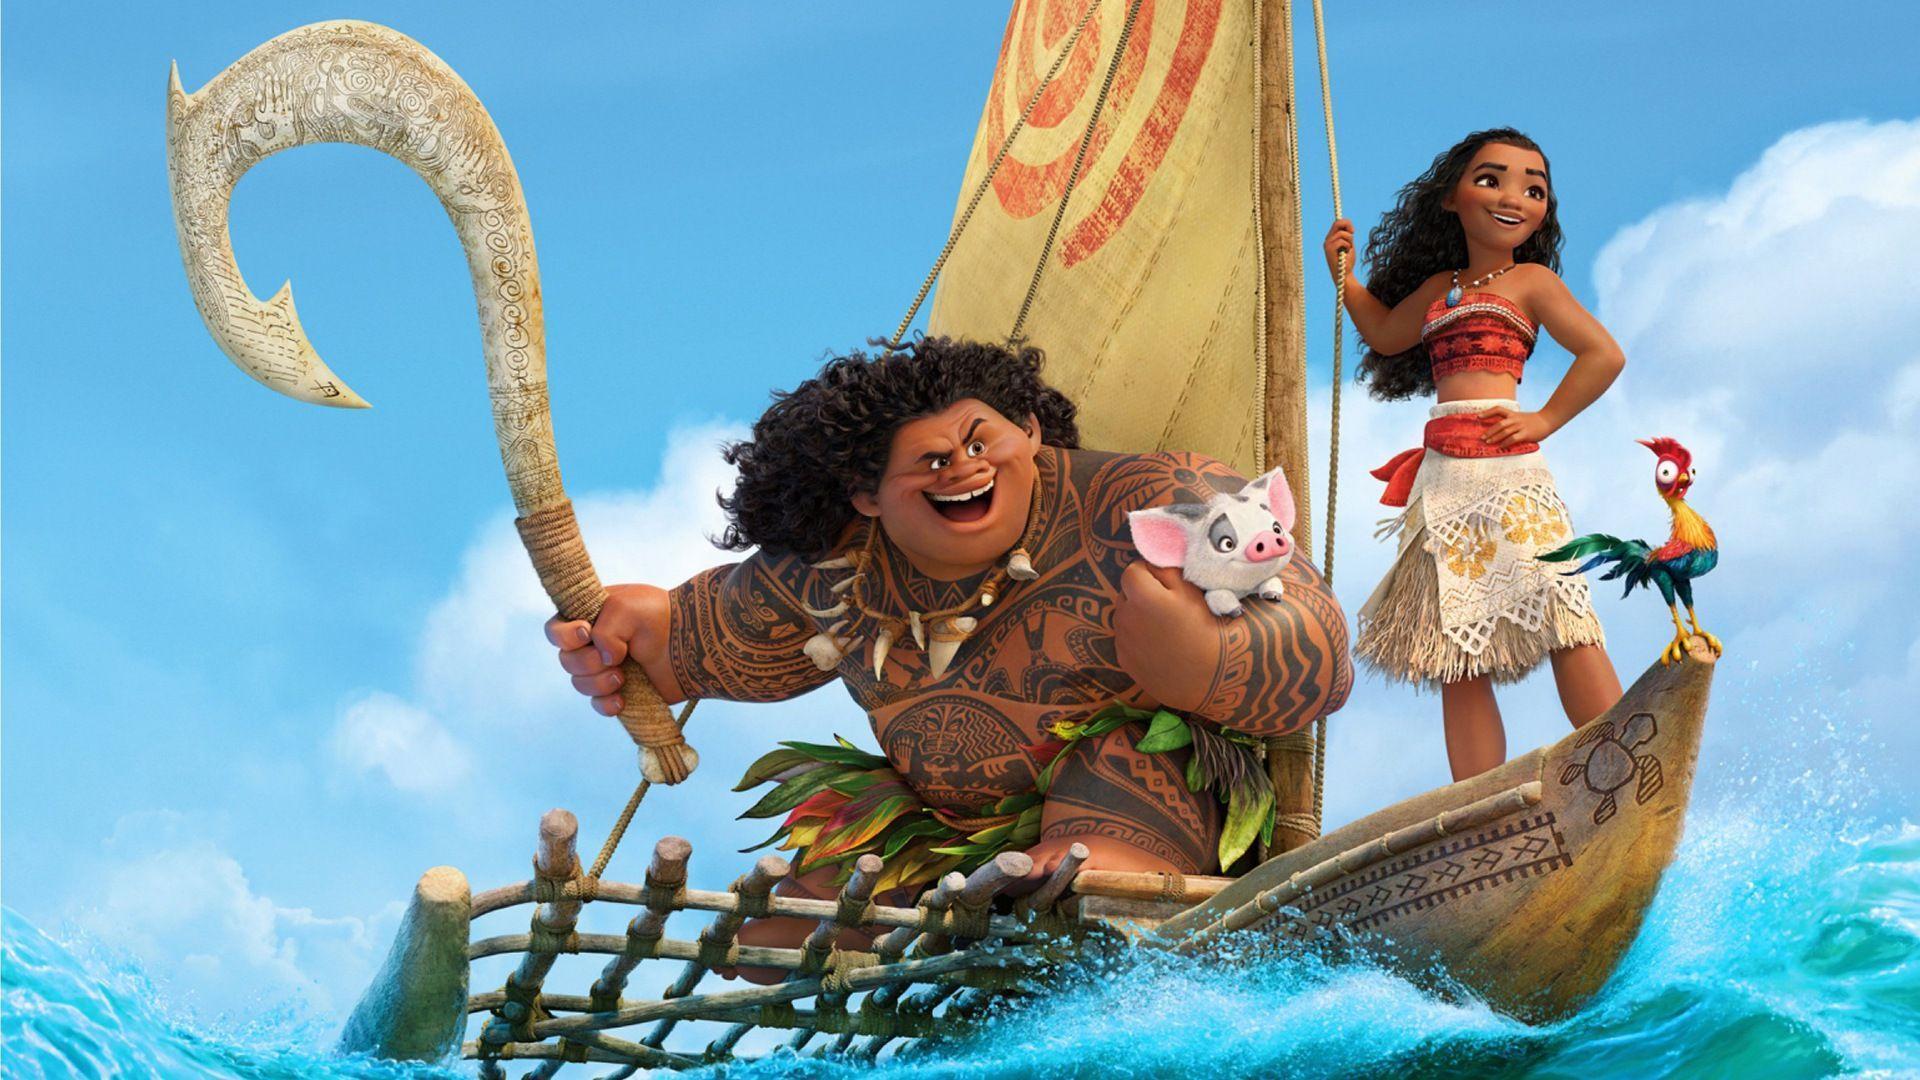 where can i download moana movie for free